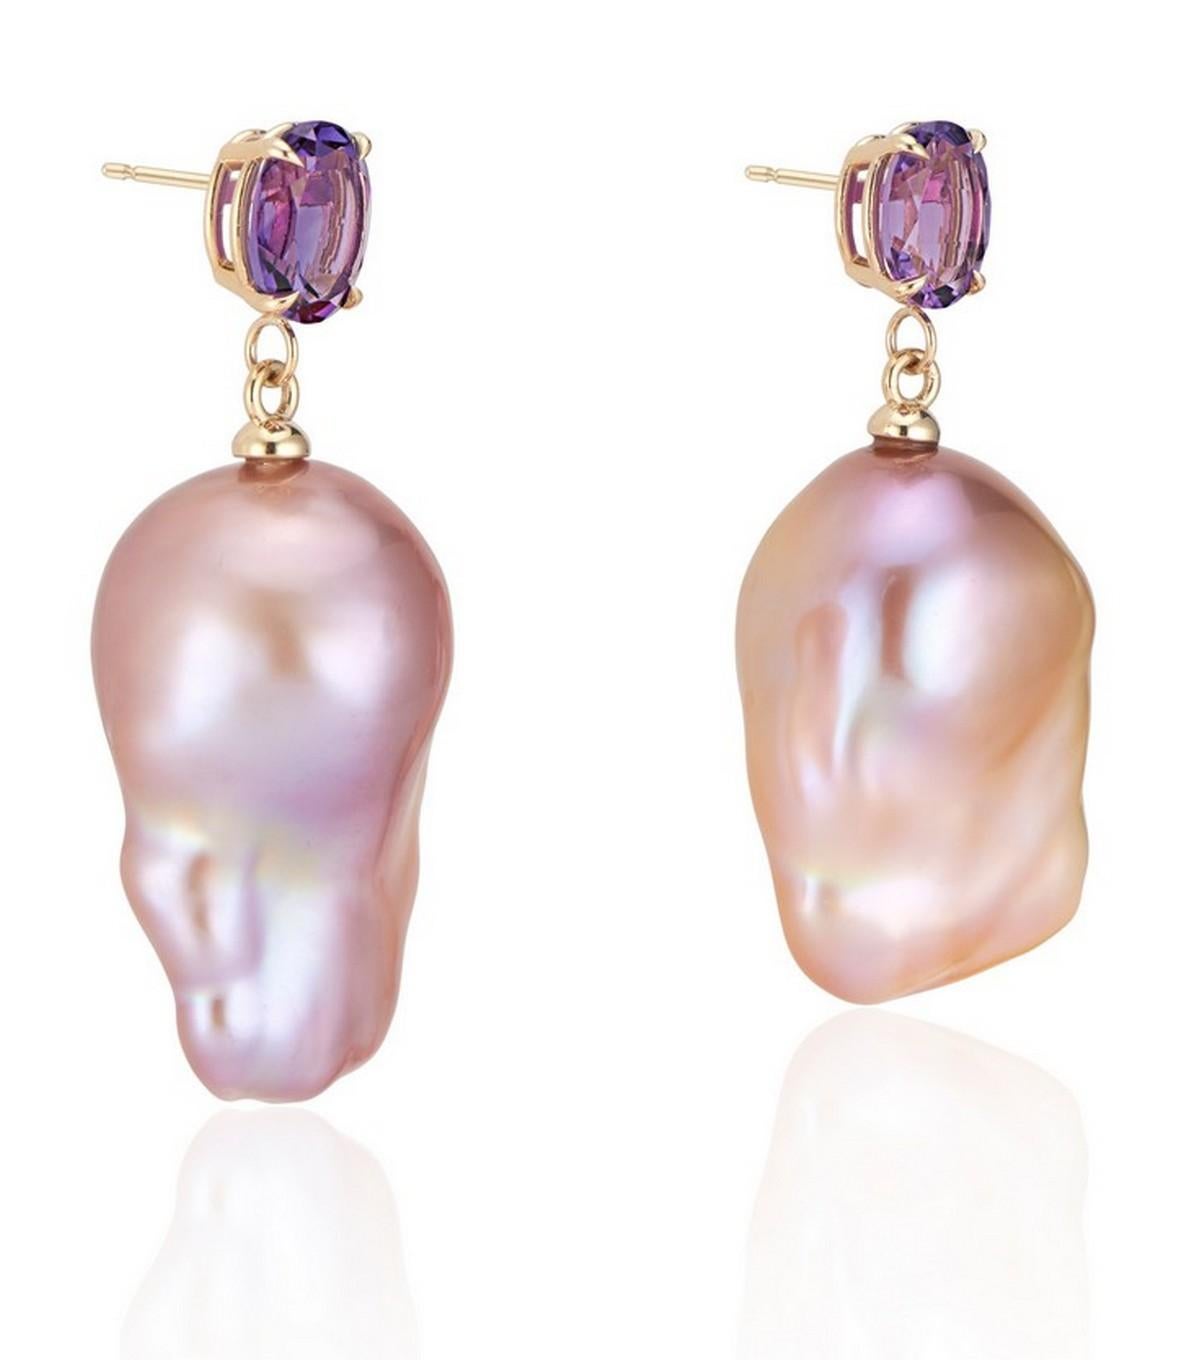 Our newest baroque pearl earring collection features this exquisite pair: a strikingly set dark royal purple amethyst on a polished 14K yellow gold basket setting, harmoniously paired with a pinkish-purple hued natural baroque pearl.

The deep